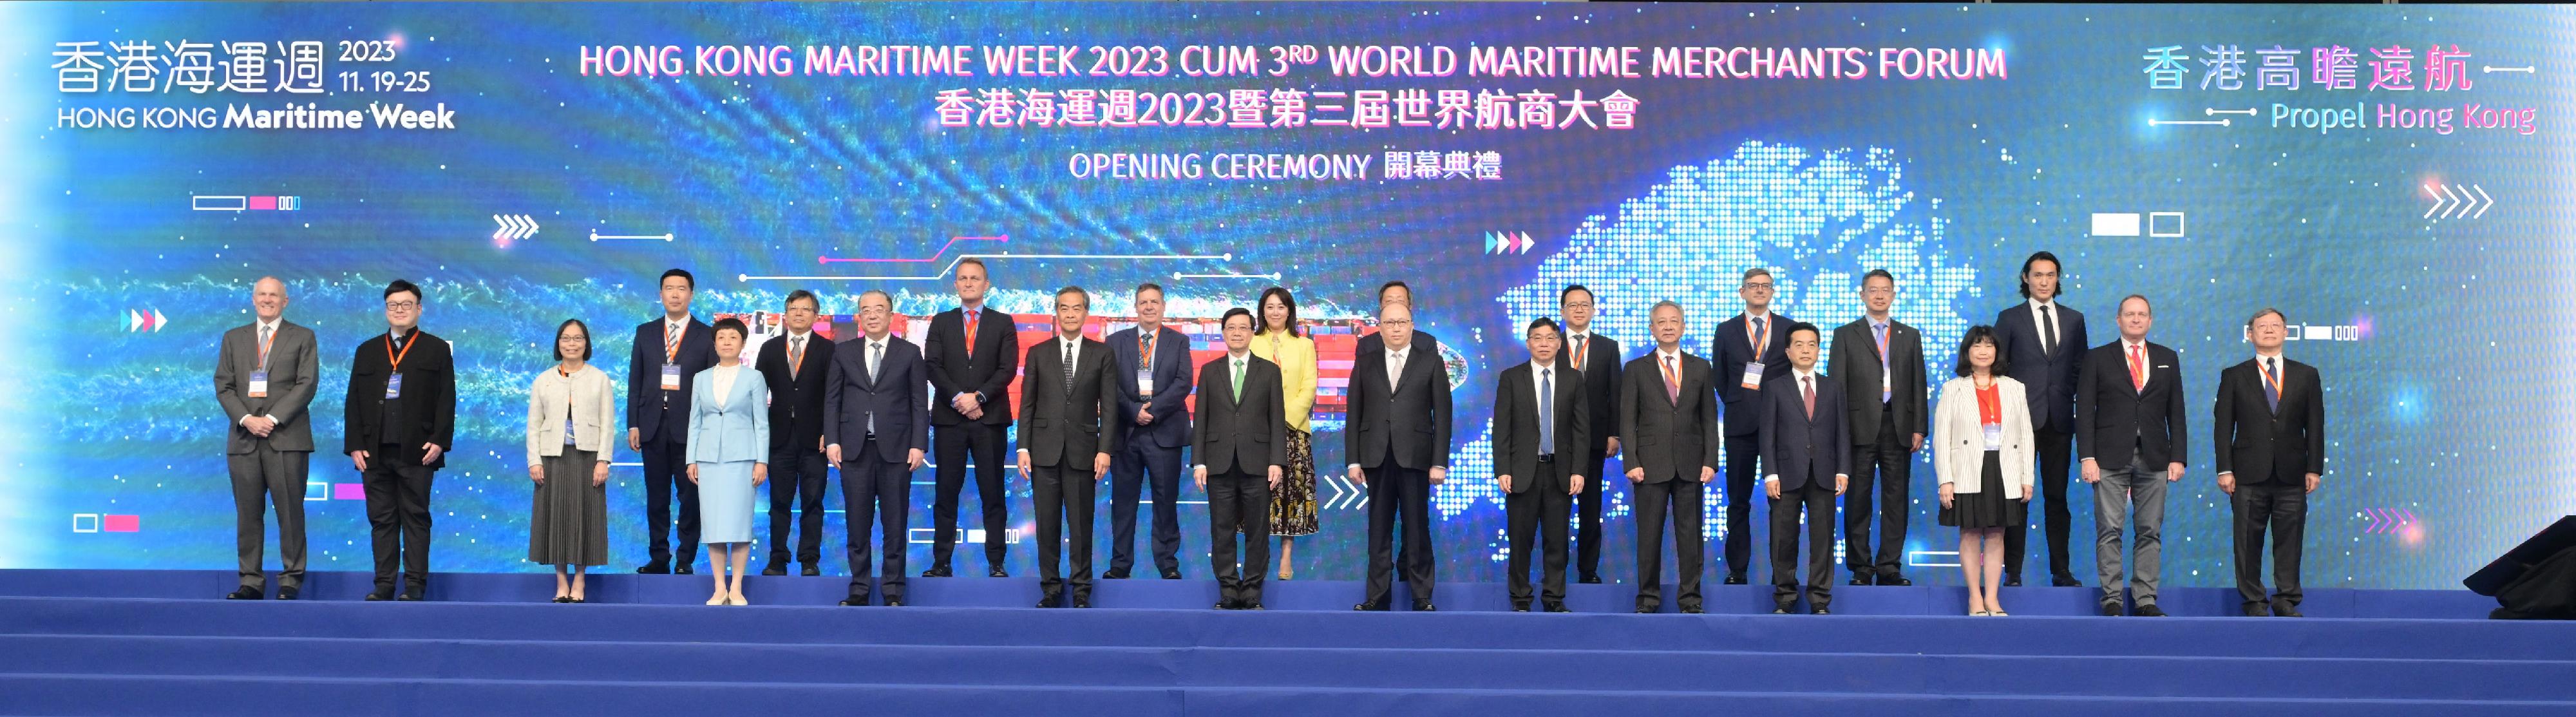 The opening ceremony of Hong Kong Maritime Week 2023, a major annual event of the maritime and port industries in Hong Kong, was held today (November 20). Photo shows the Chief Executive, Mr John Lee (front row, seventh left); Vice-Chairman of the National Committee of the Chinese People's Political Consultative Conference Mr C Y Leung (front row, sixth left); the Director of the Liaison Office of the Central People's Government in the Hong Kong Special Administrative Region, Mr Zheng Yanxiong (front row, seventh right); Vice Minister of Transport Mr Fu Xuyin (front row, fifth left); the Chairman of the Hong Kong Maritime and Port Board and Secretary for Transport and Logistics, Mr Lam Sai-hung (front row, sixth right); the Chairman of the China Merchants Group, Mr Miao Jianmin (front row, fourth right), and other guests at the ceremony.